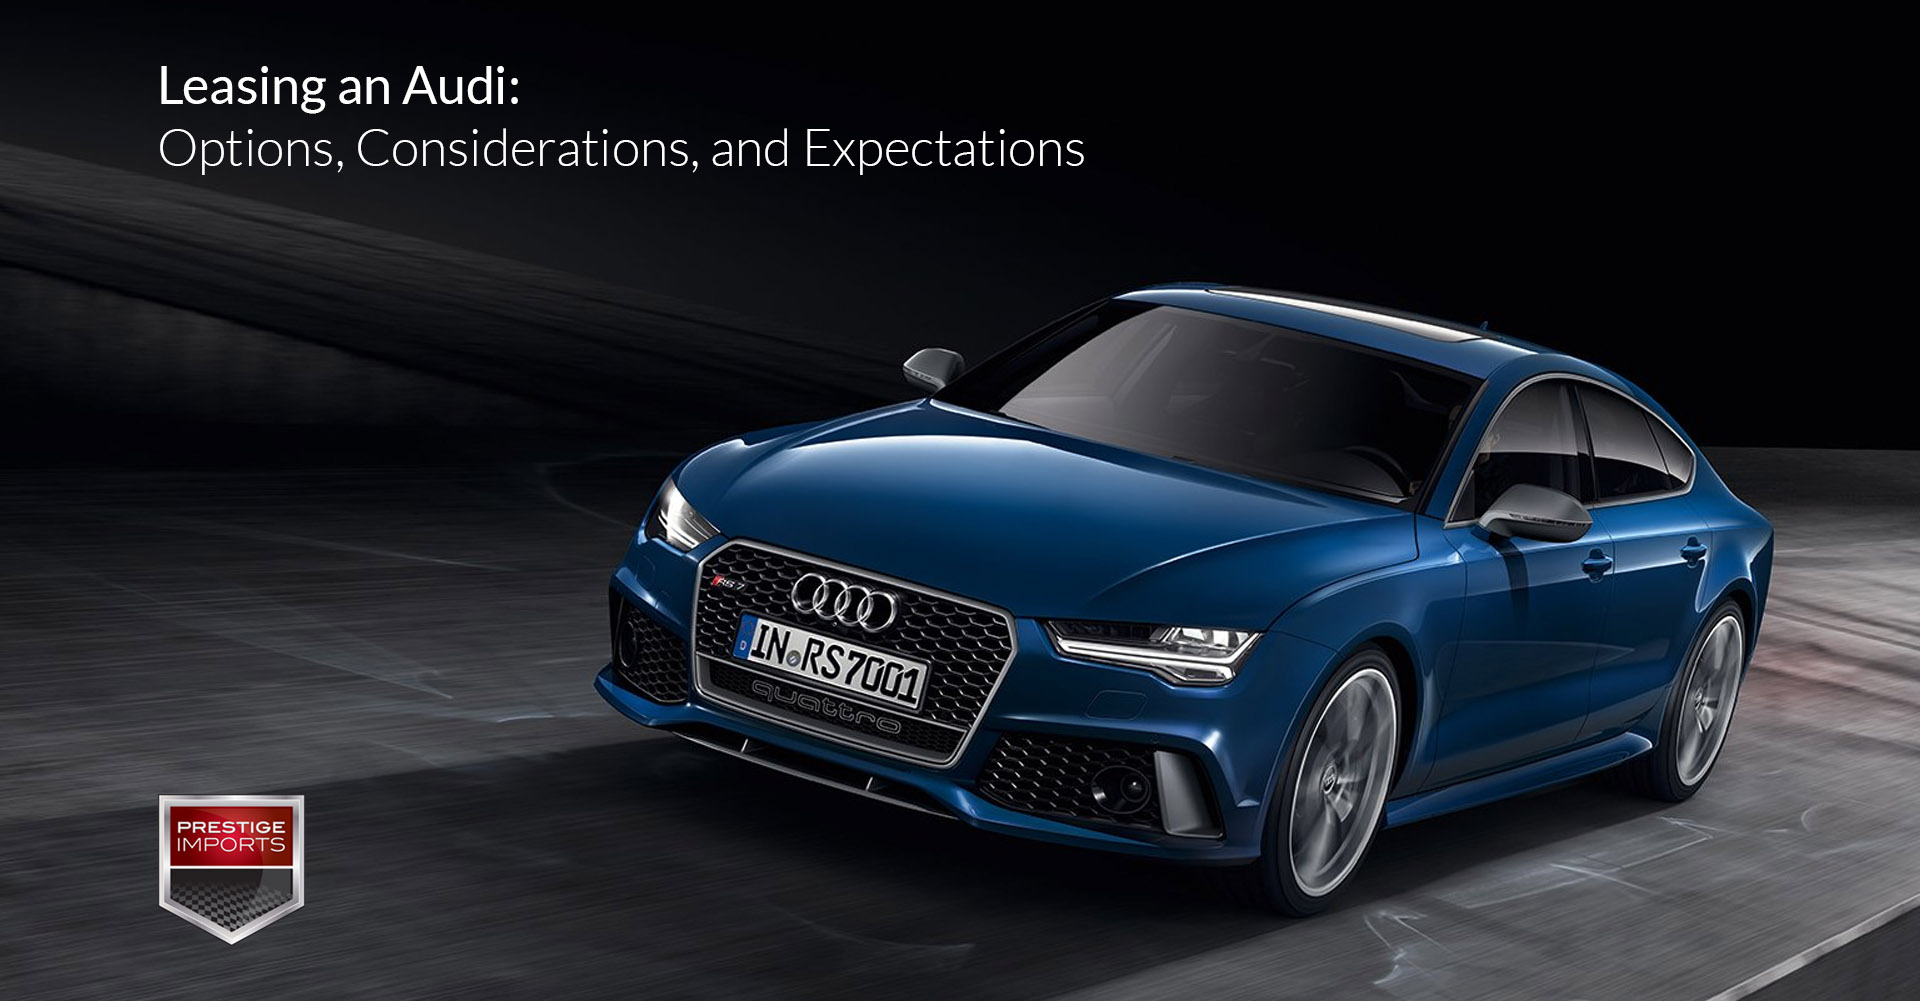 Photo of a blue Audi RS7, used to illustrate the article "Leasing an Audi - Options, Considerations, and Expectations"